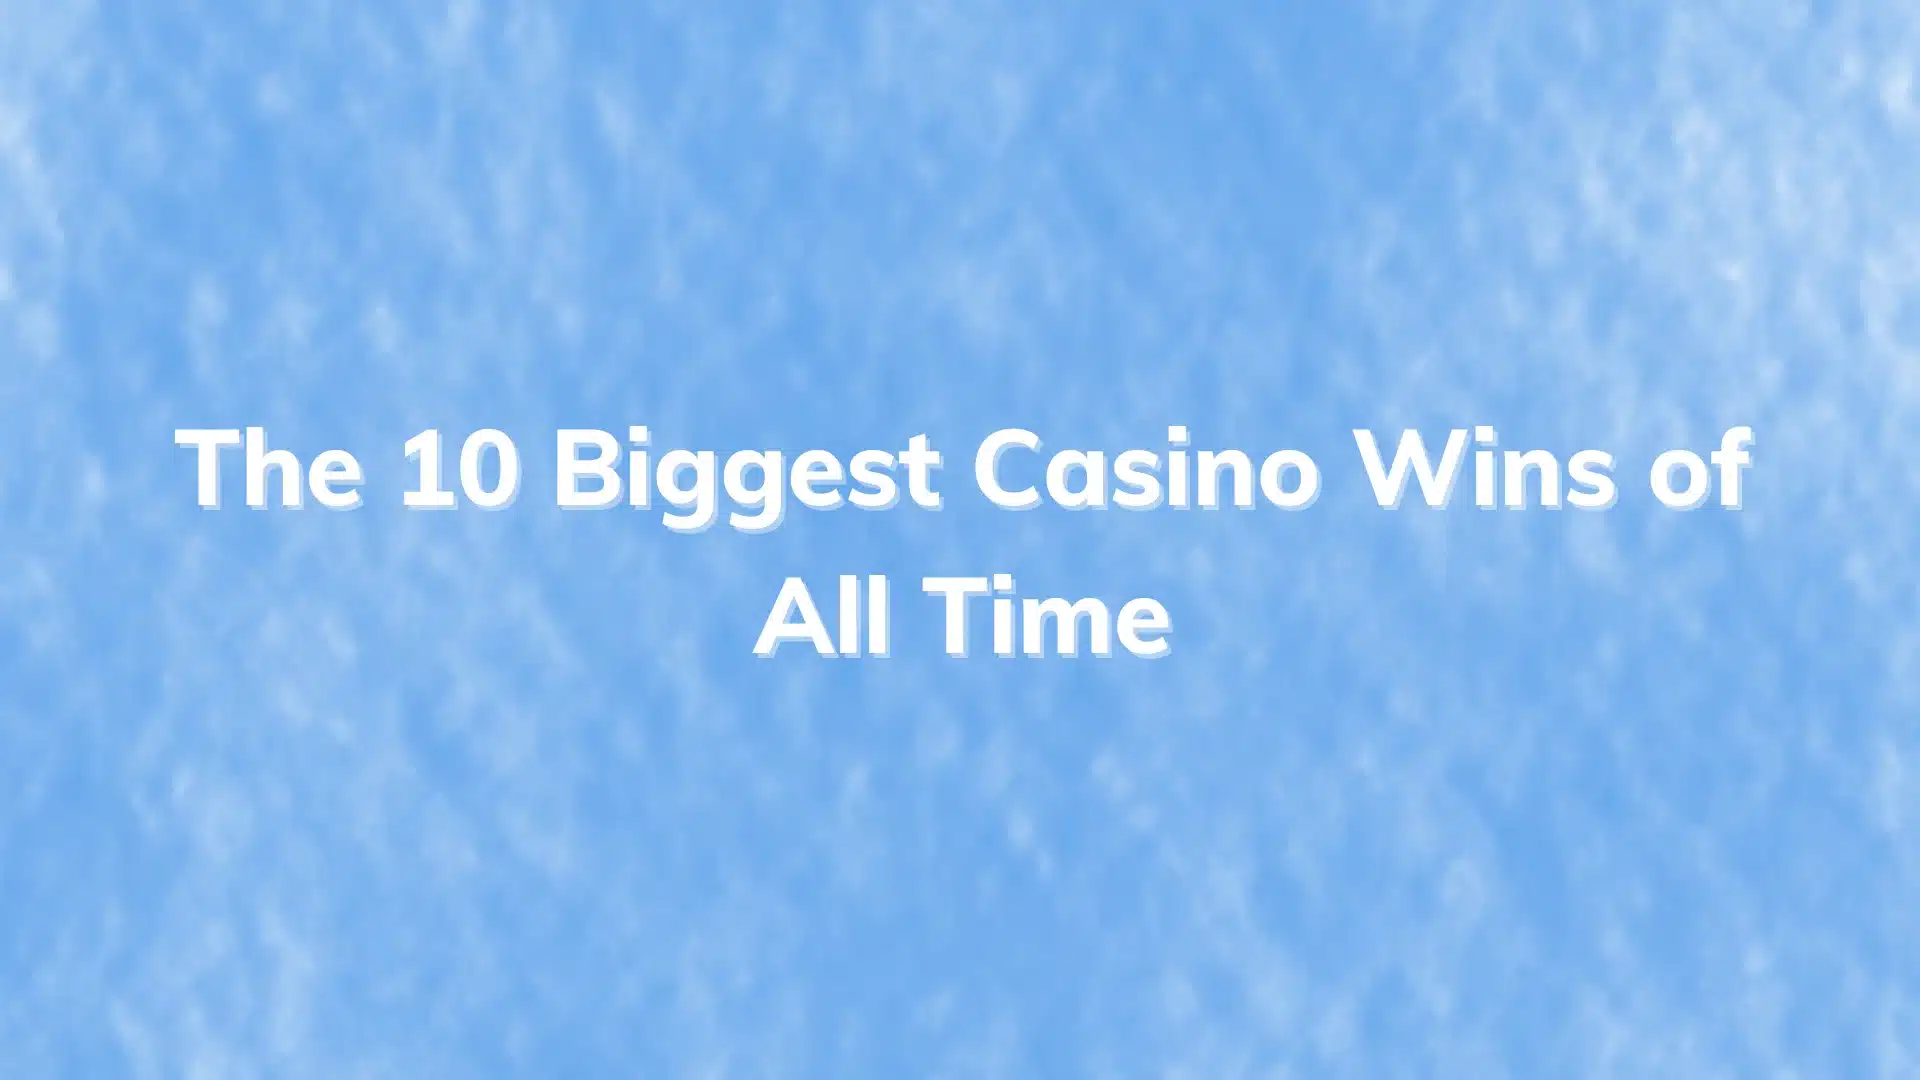 The 10 Biggest Casino Wins of All Time